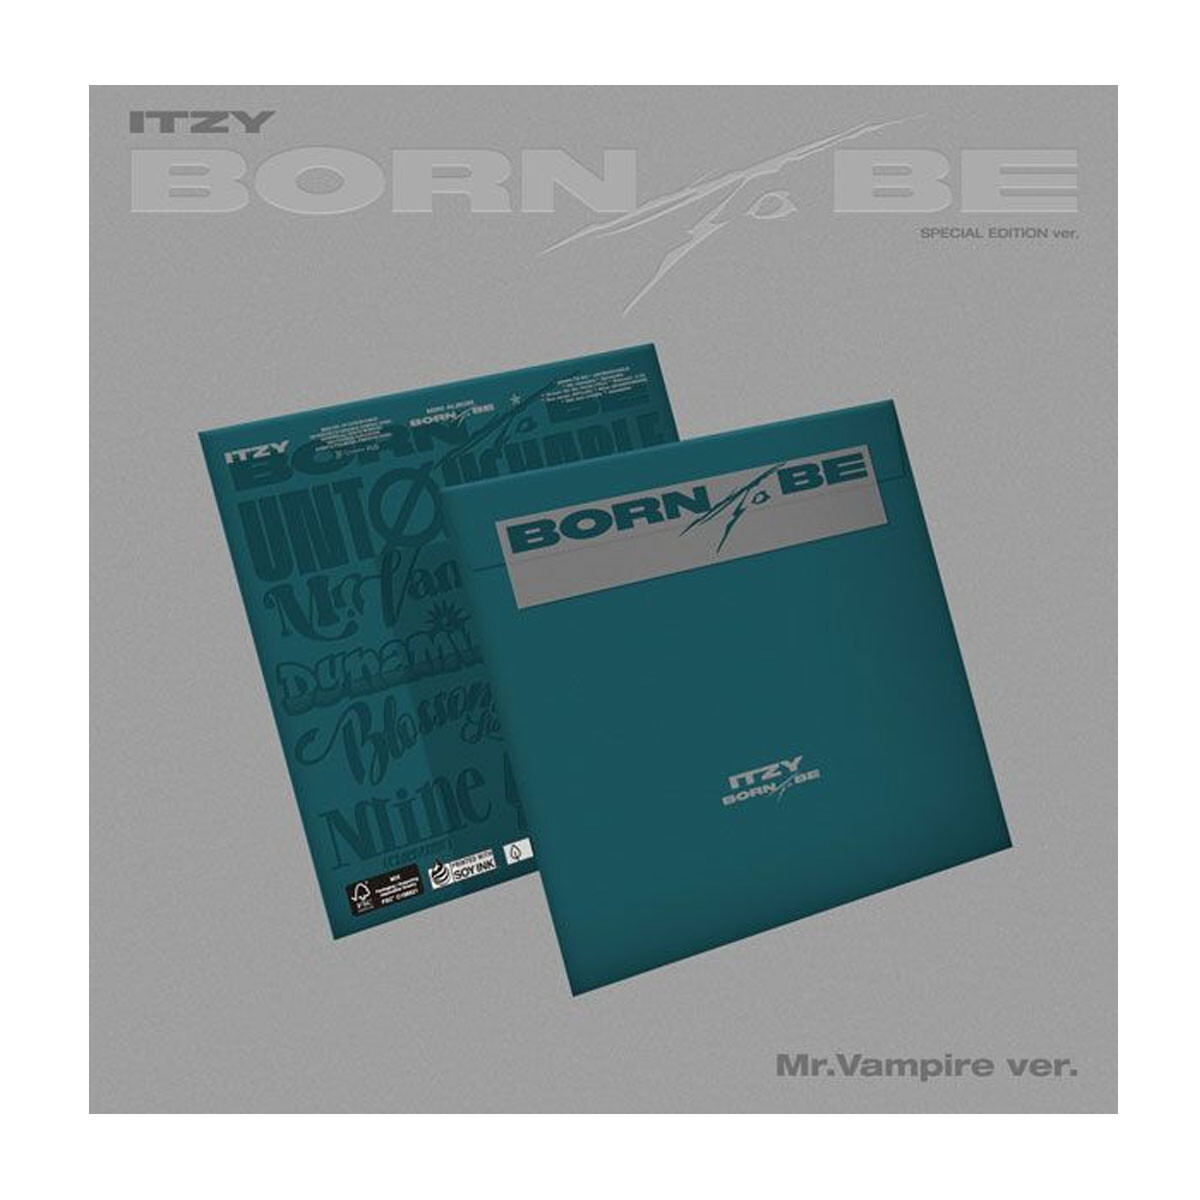 Itzy / Born To Be - Special Edition - Mr. Vampire Version - Cd 